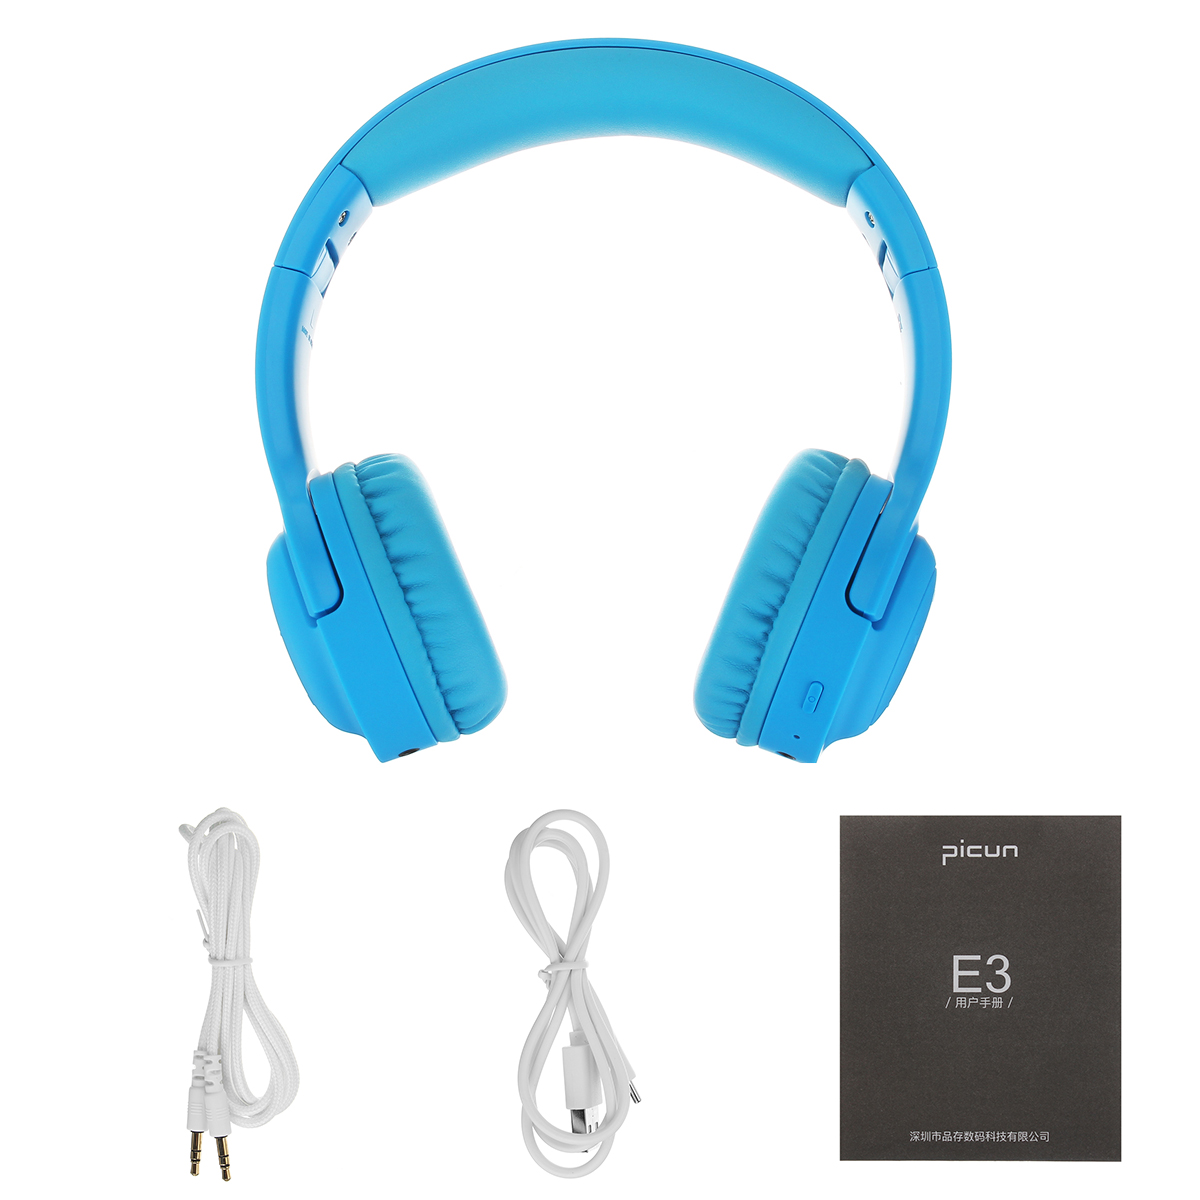 Picun-E3-Portable-Foldable-Kids-Headphone-bluetooth-Wireless-Headset-Built-in-Mic-with-Type-C-Chargi-1615886-9